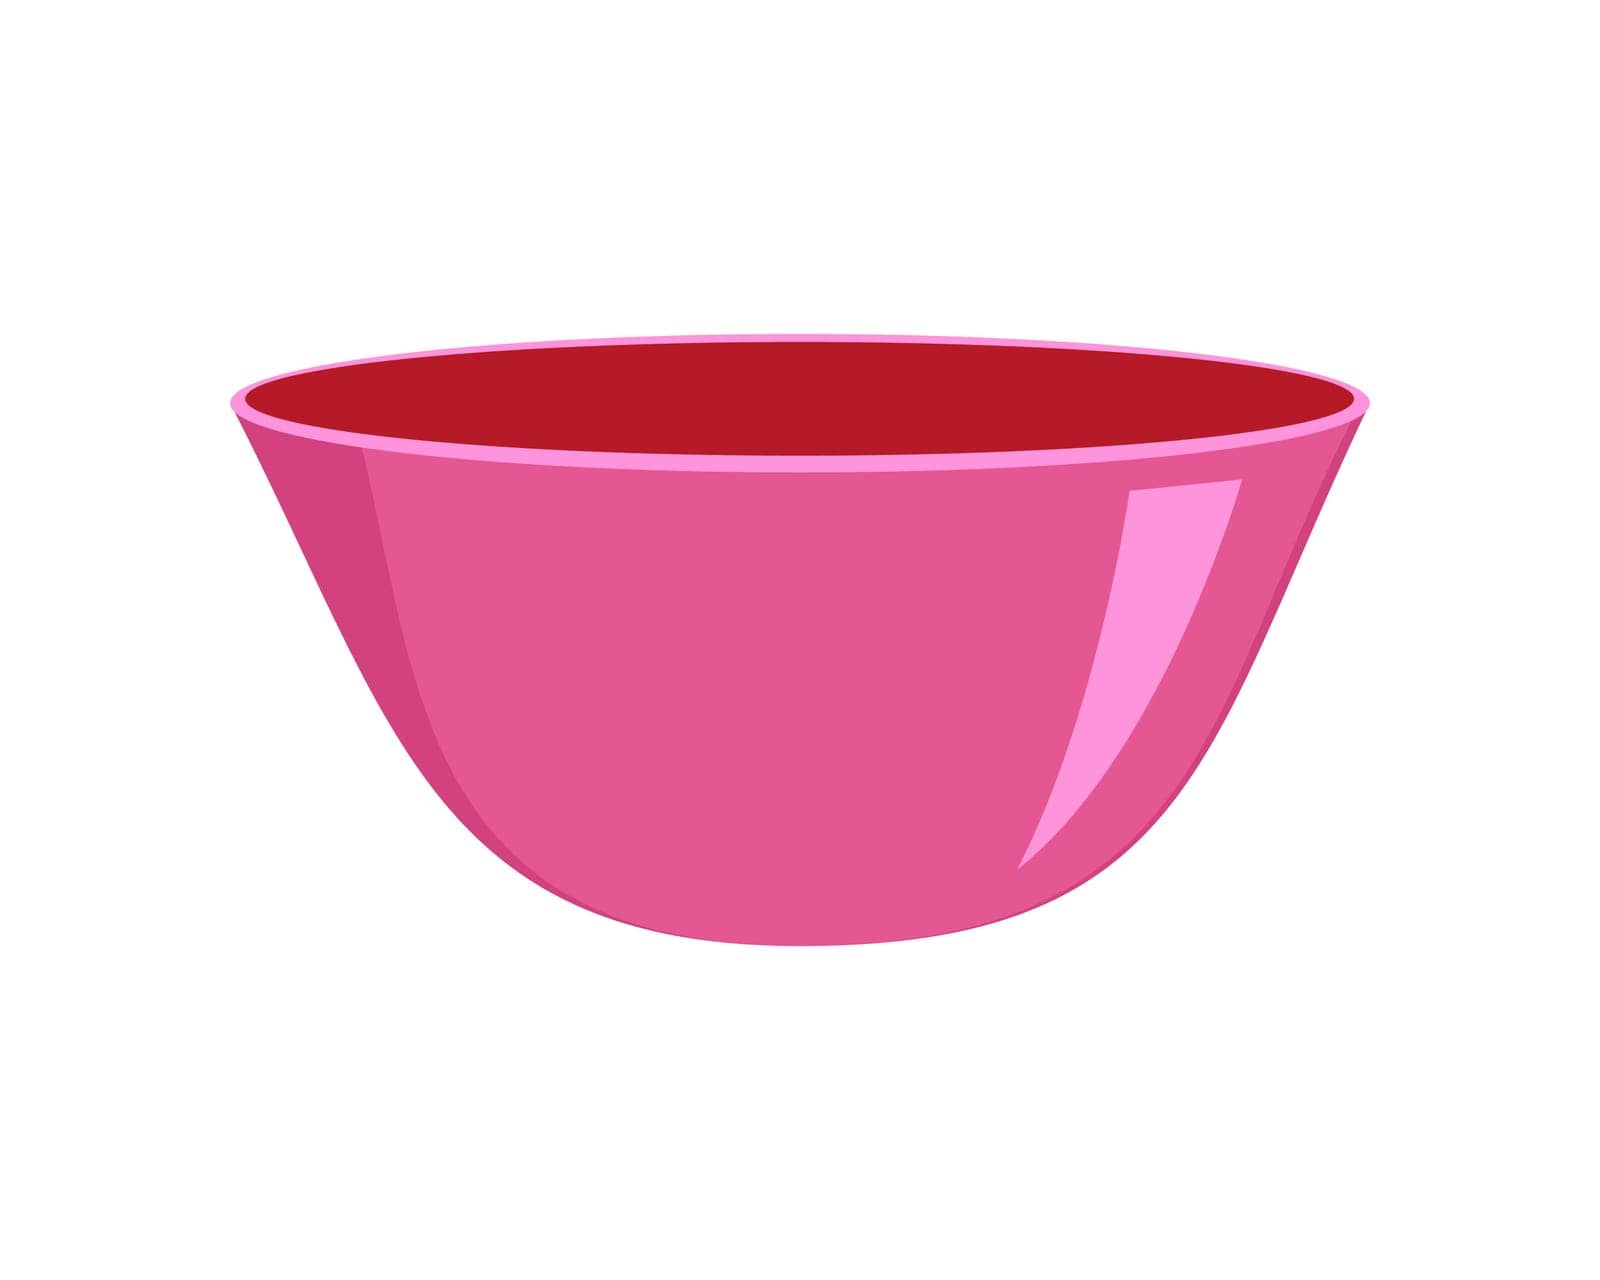 Pink empty plastic or ceramic bowl isolated on white background. Clean dishware for soup, salad or cereal. Vector cartoon illustration by Ablohina